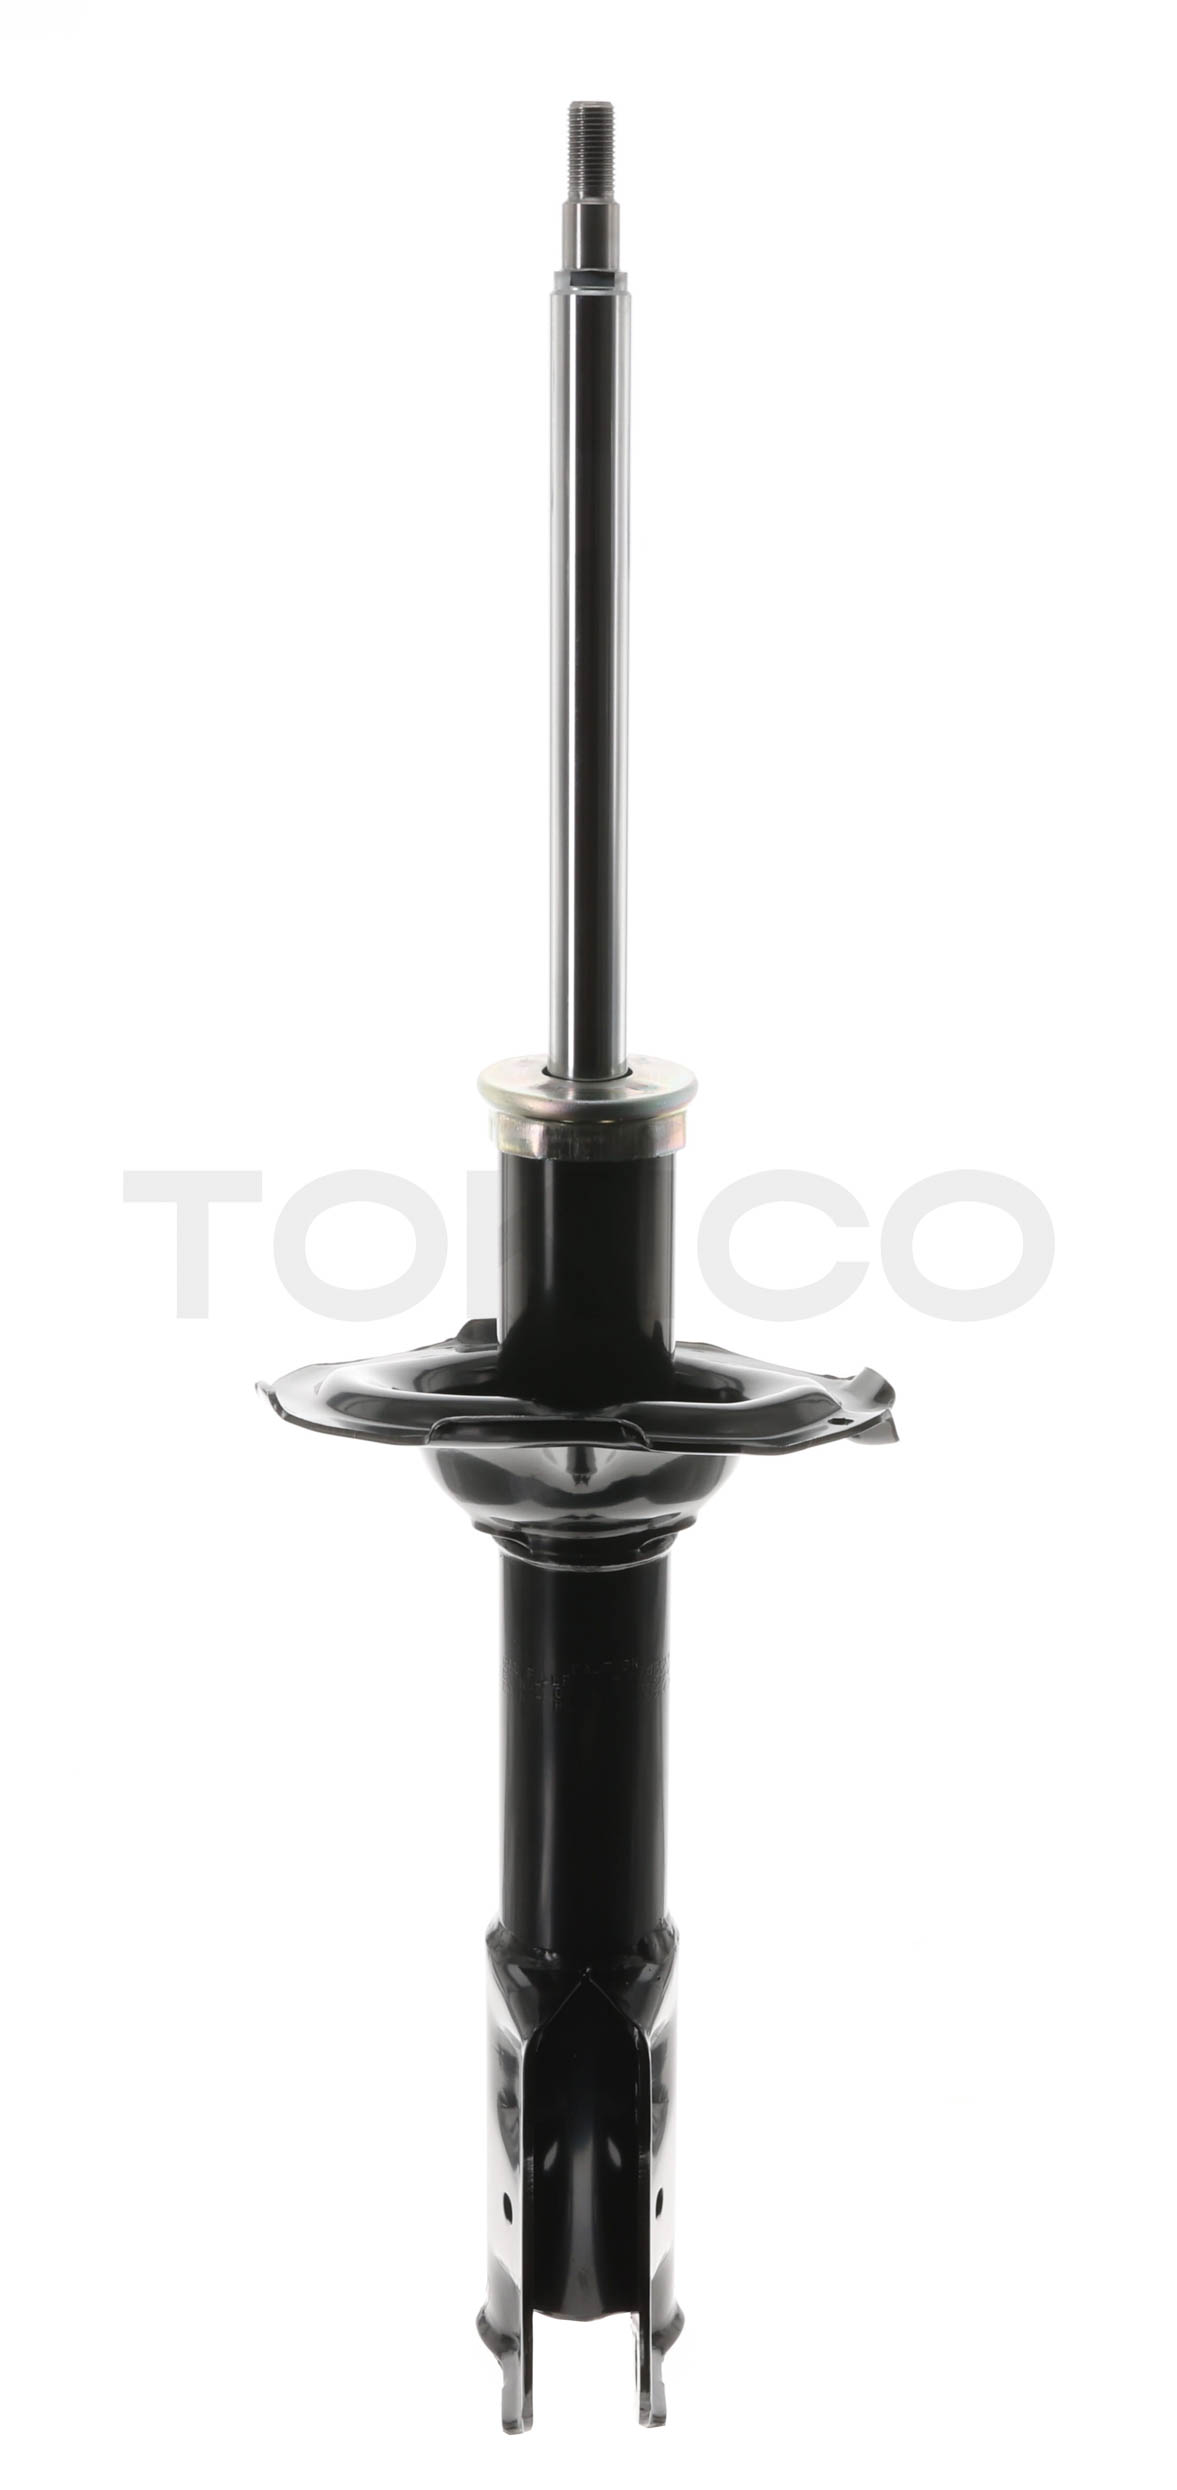 TOKICO B2220 Shock absorber SEAT experience and price